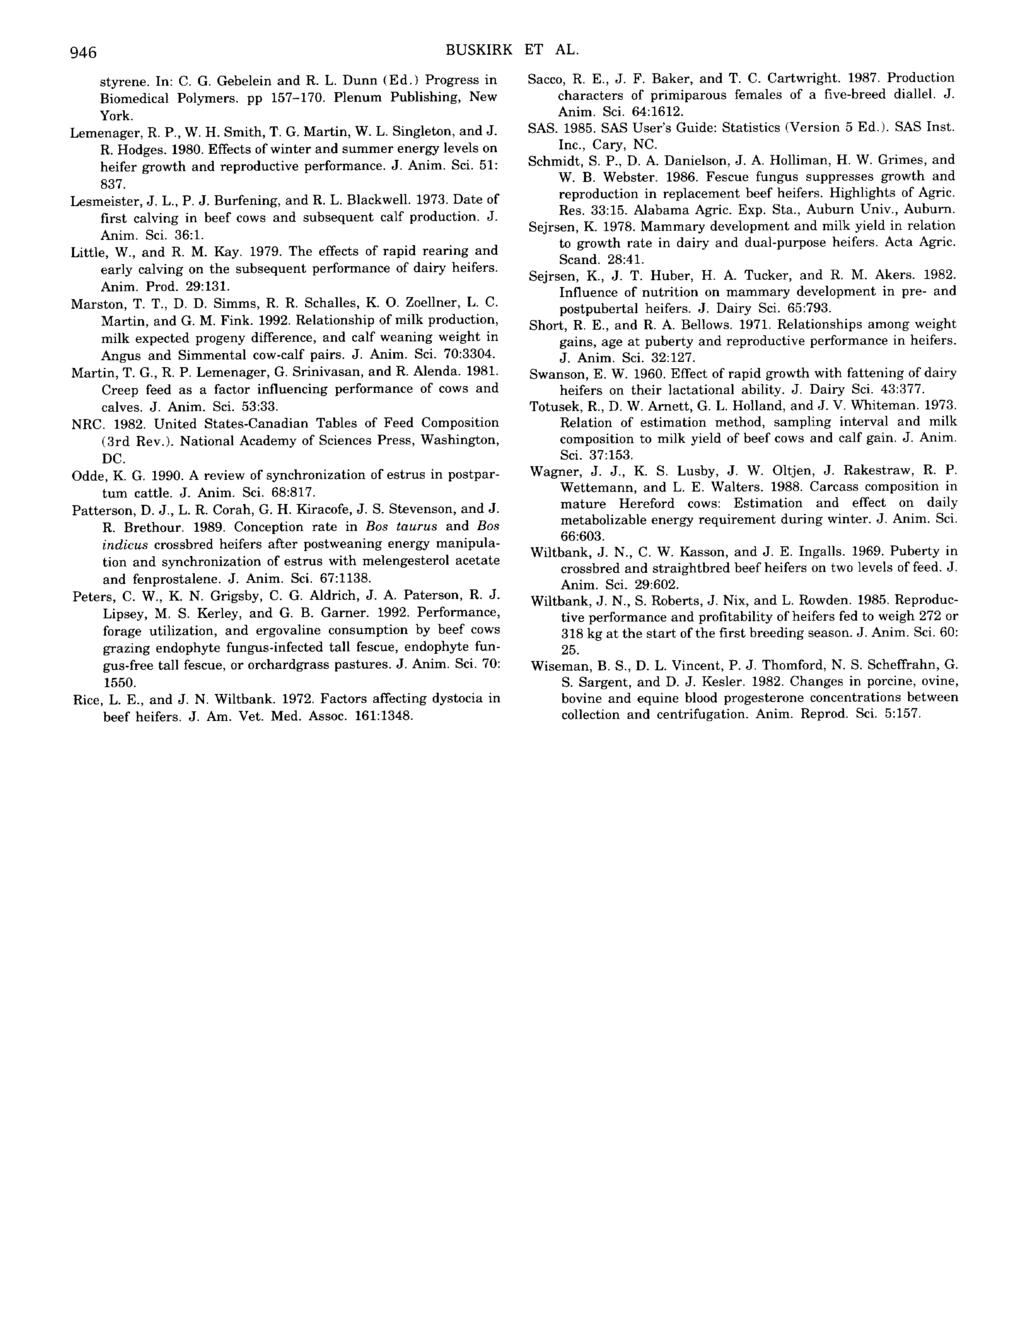 946 BUSKIRK styrene. In: C. G. Gebelein and R. L. Dunn (Ed.) Progress in Biomedical Polymers. pp 157-170. Plenum Publishing, New York. Lemenager, R. P,, W. H. Smith, T. G. Martin, W. L. Singleton, and J.